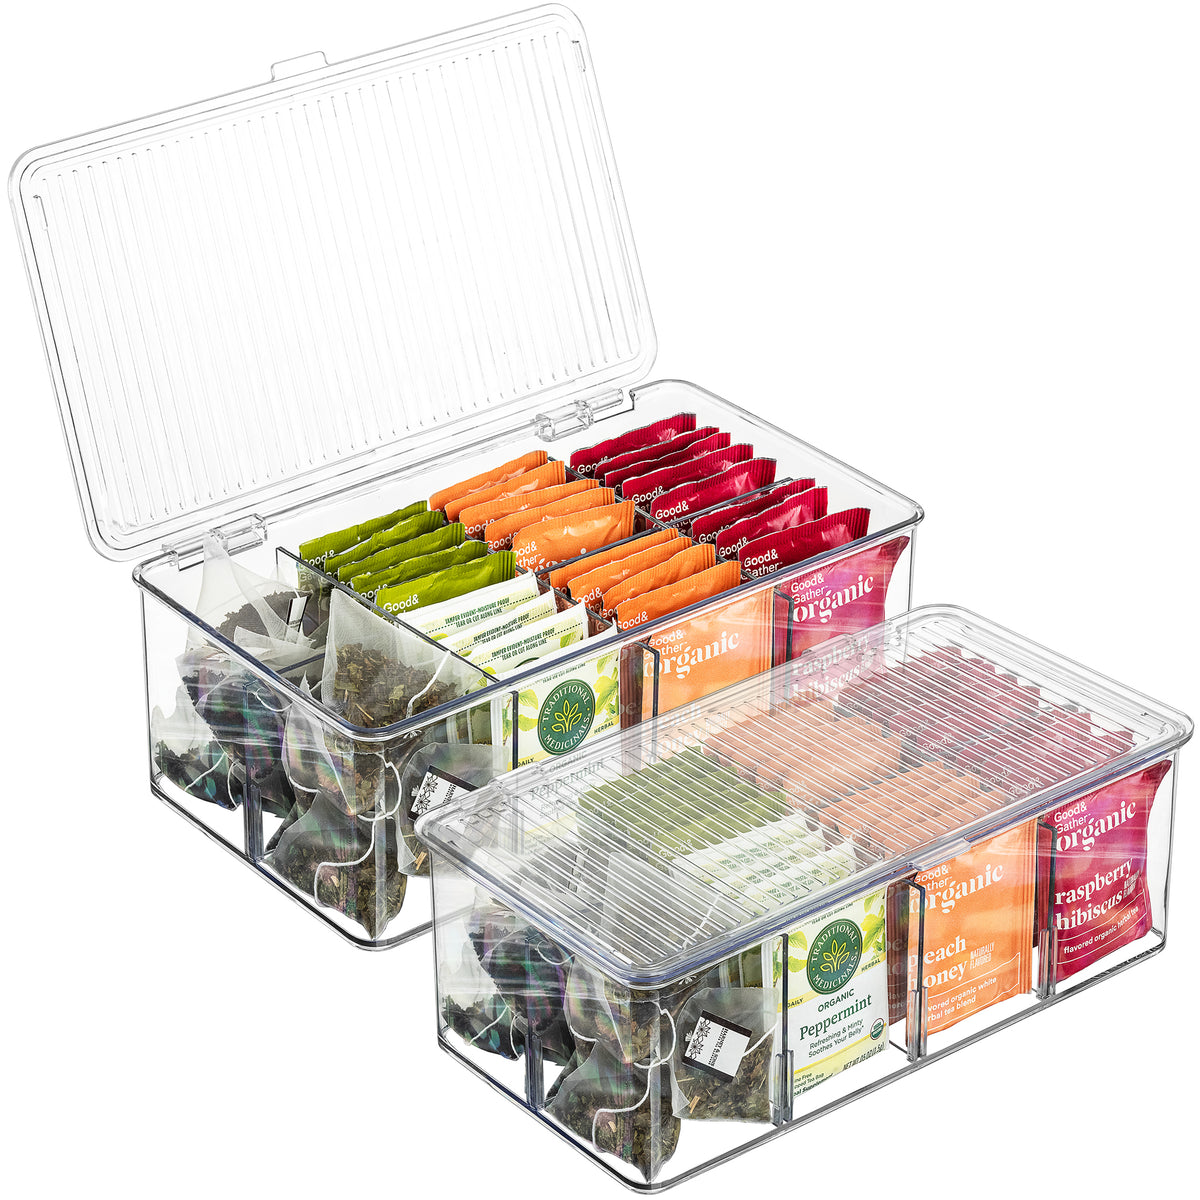 Sorbus Organizer Bins with Attached lids | Kitchen Pantry Organization  Storage Bins, Small Clear Storage Box for Fridge | Food Storage Containers  for